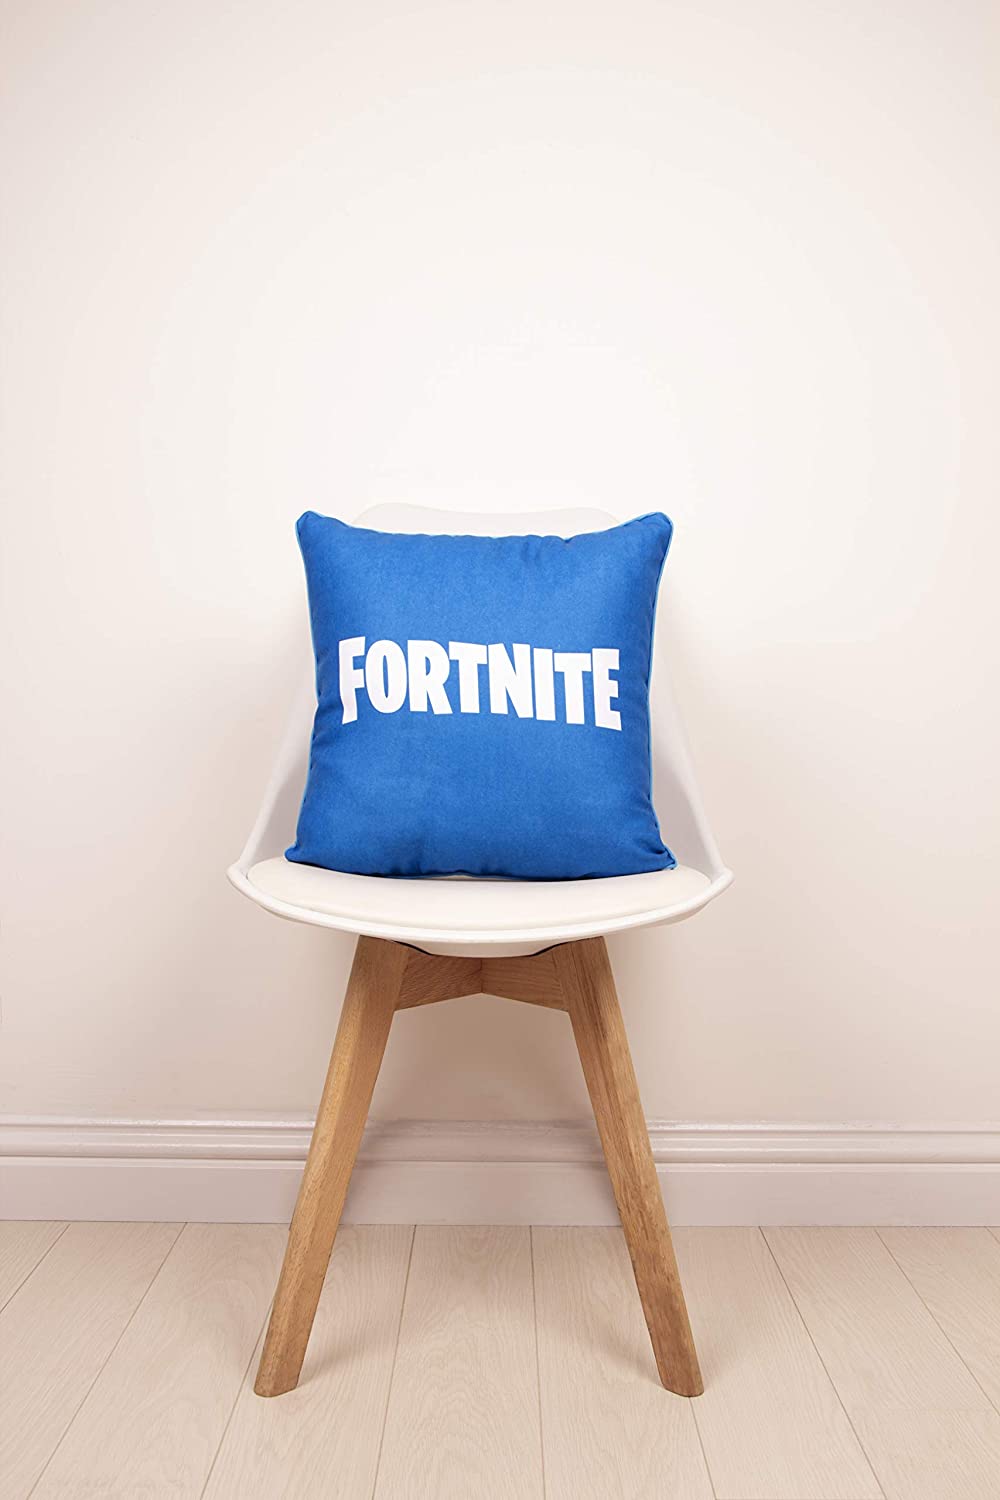 Fortnite Official Filled Decorative Scatter Cushion